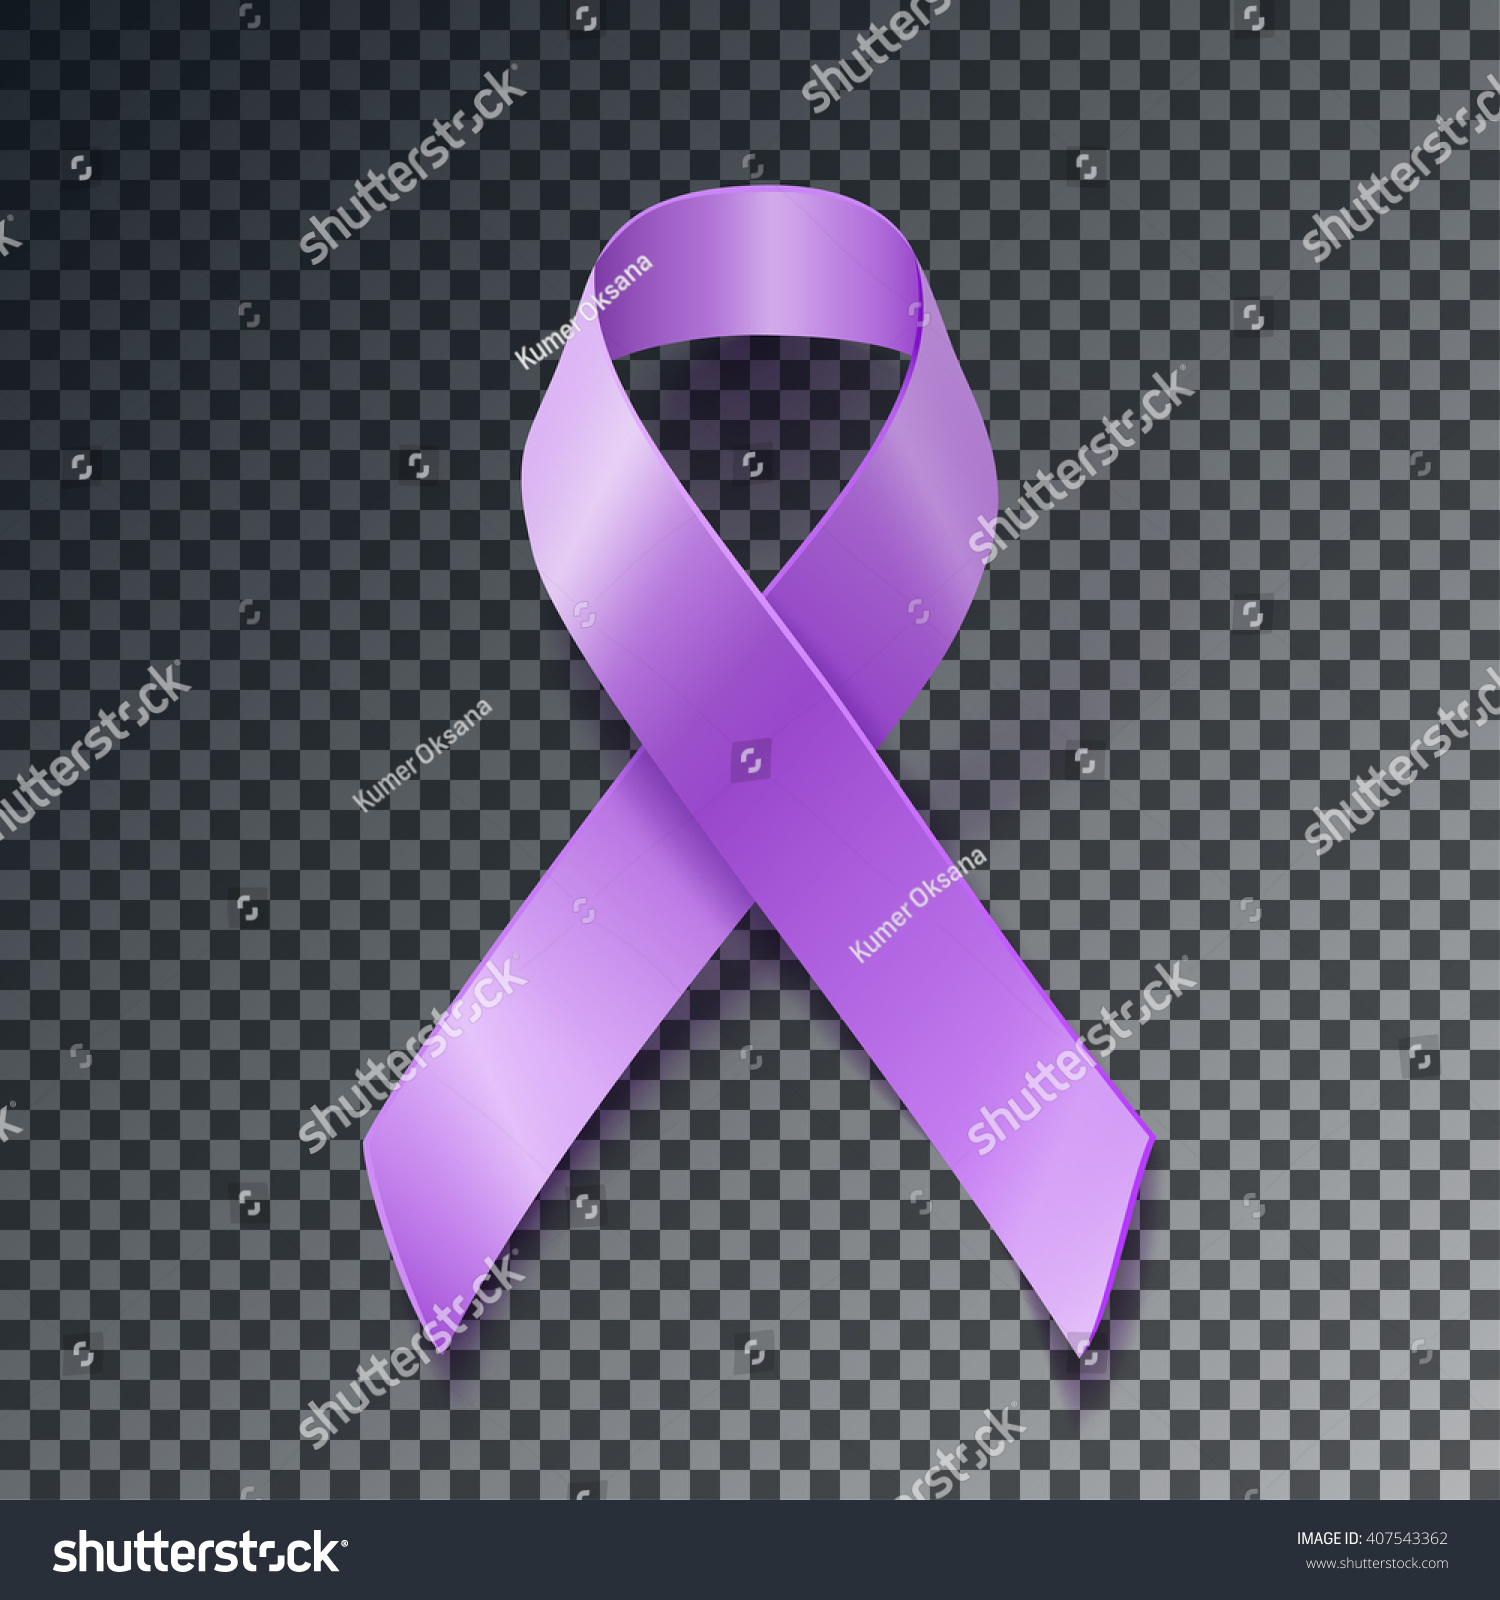 SVG of Periwinkle ribbon on geometric background. Eating Disorder, Bulimia and other awareness symbol.  svg